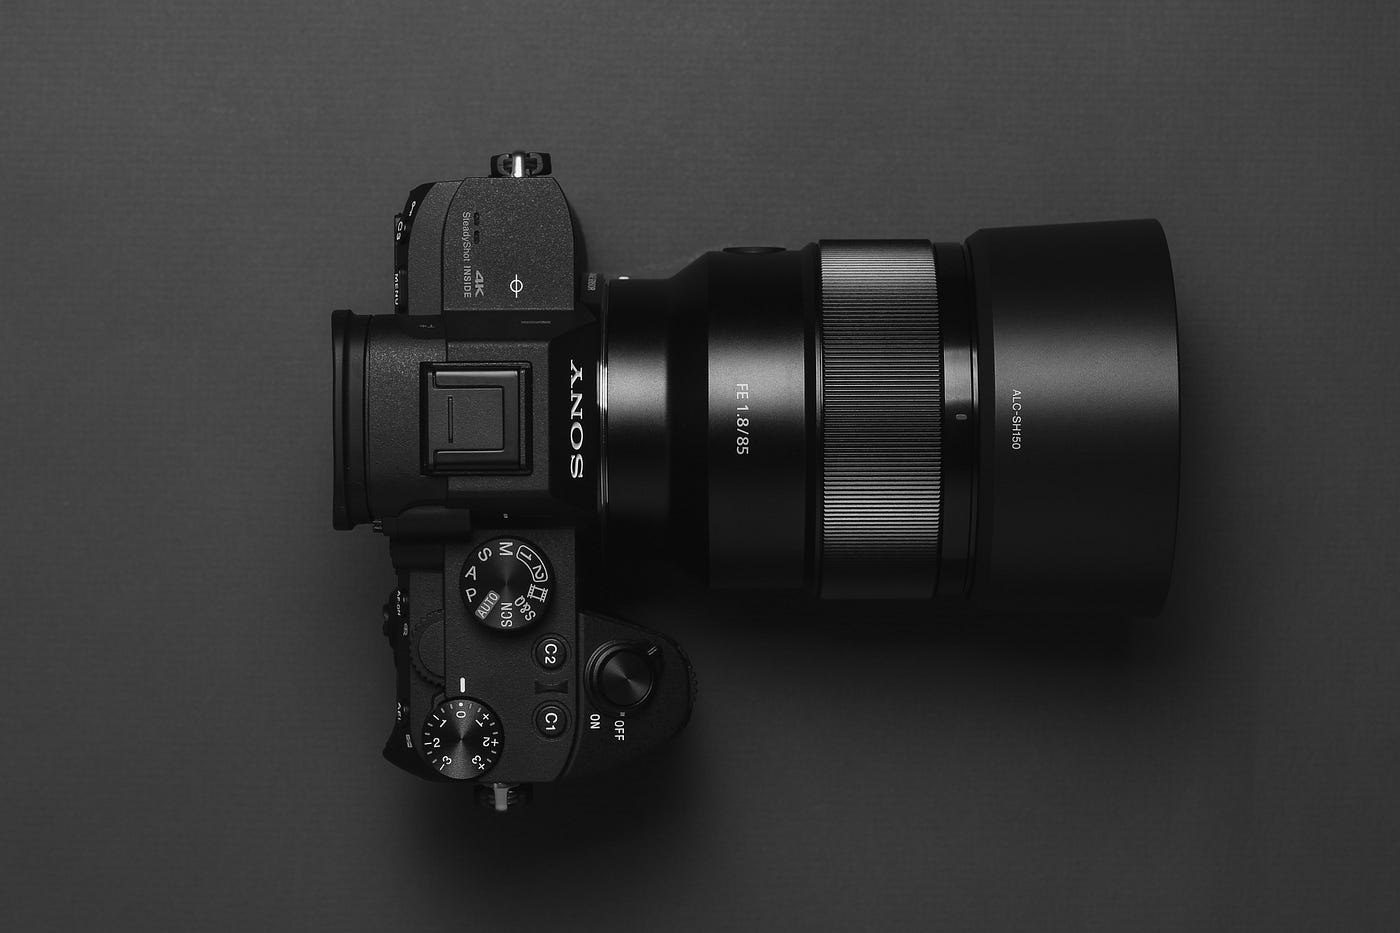 Sony a7 IV review: A worthy photo upgrade over the a7 III